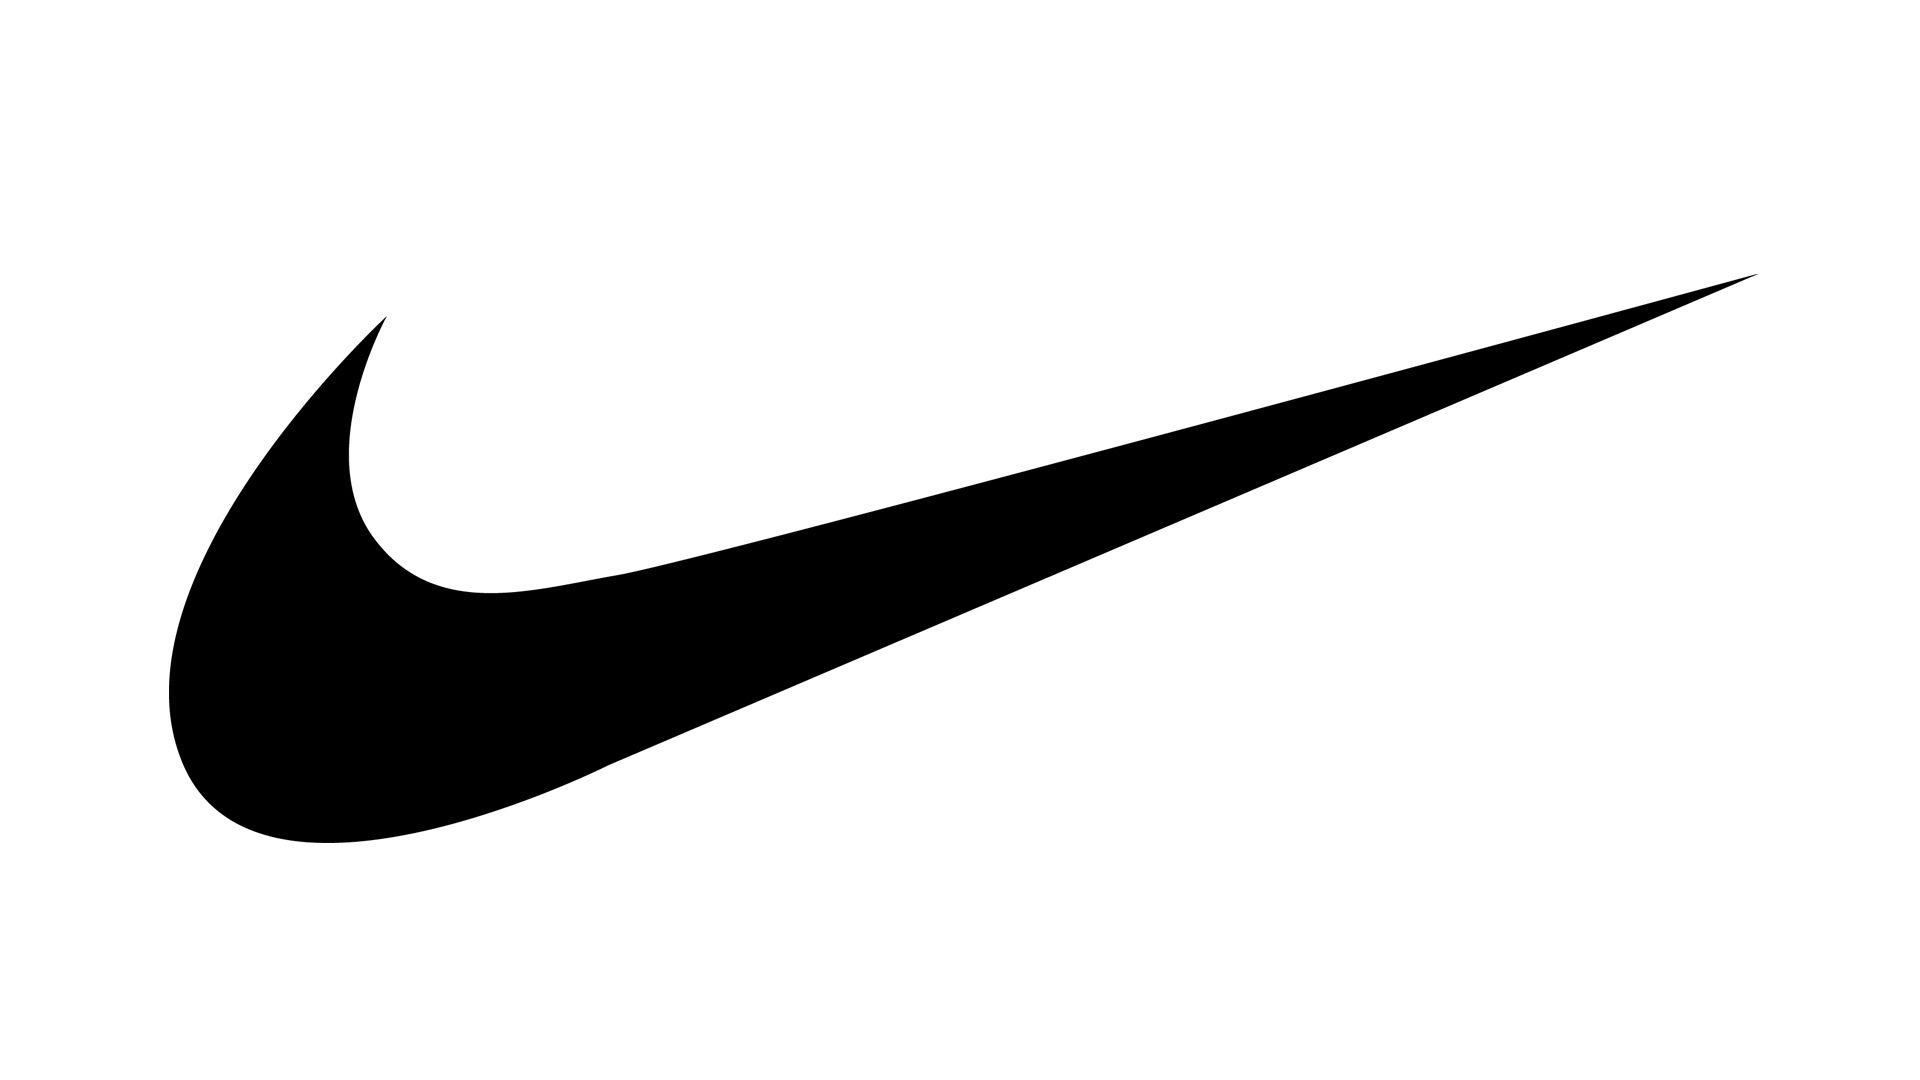 Nike 4K wallpaper for your desktop or mobile screen free and easy